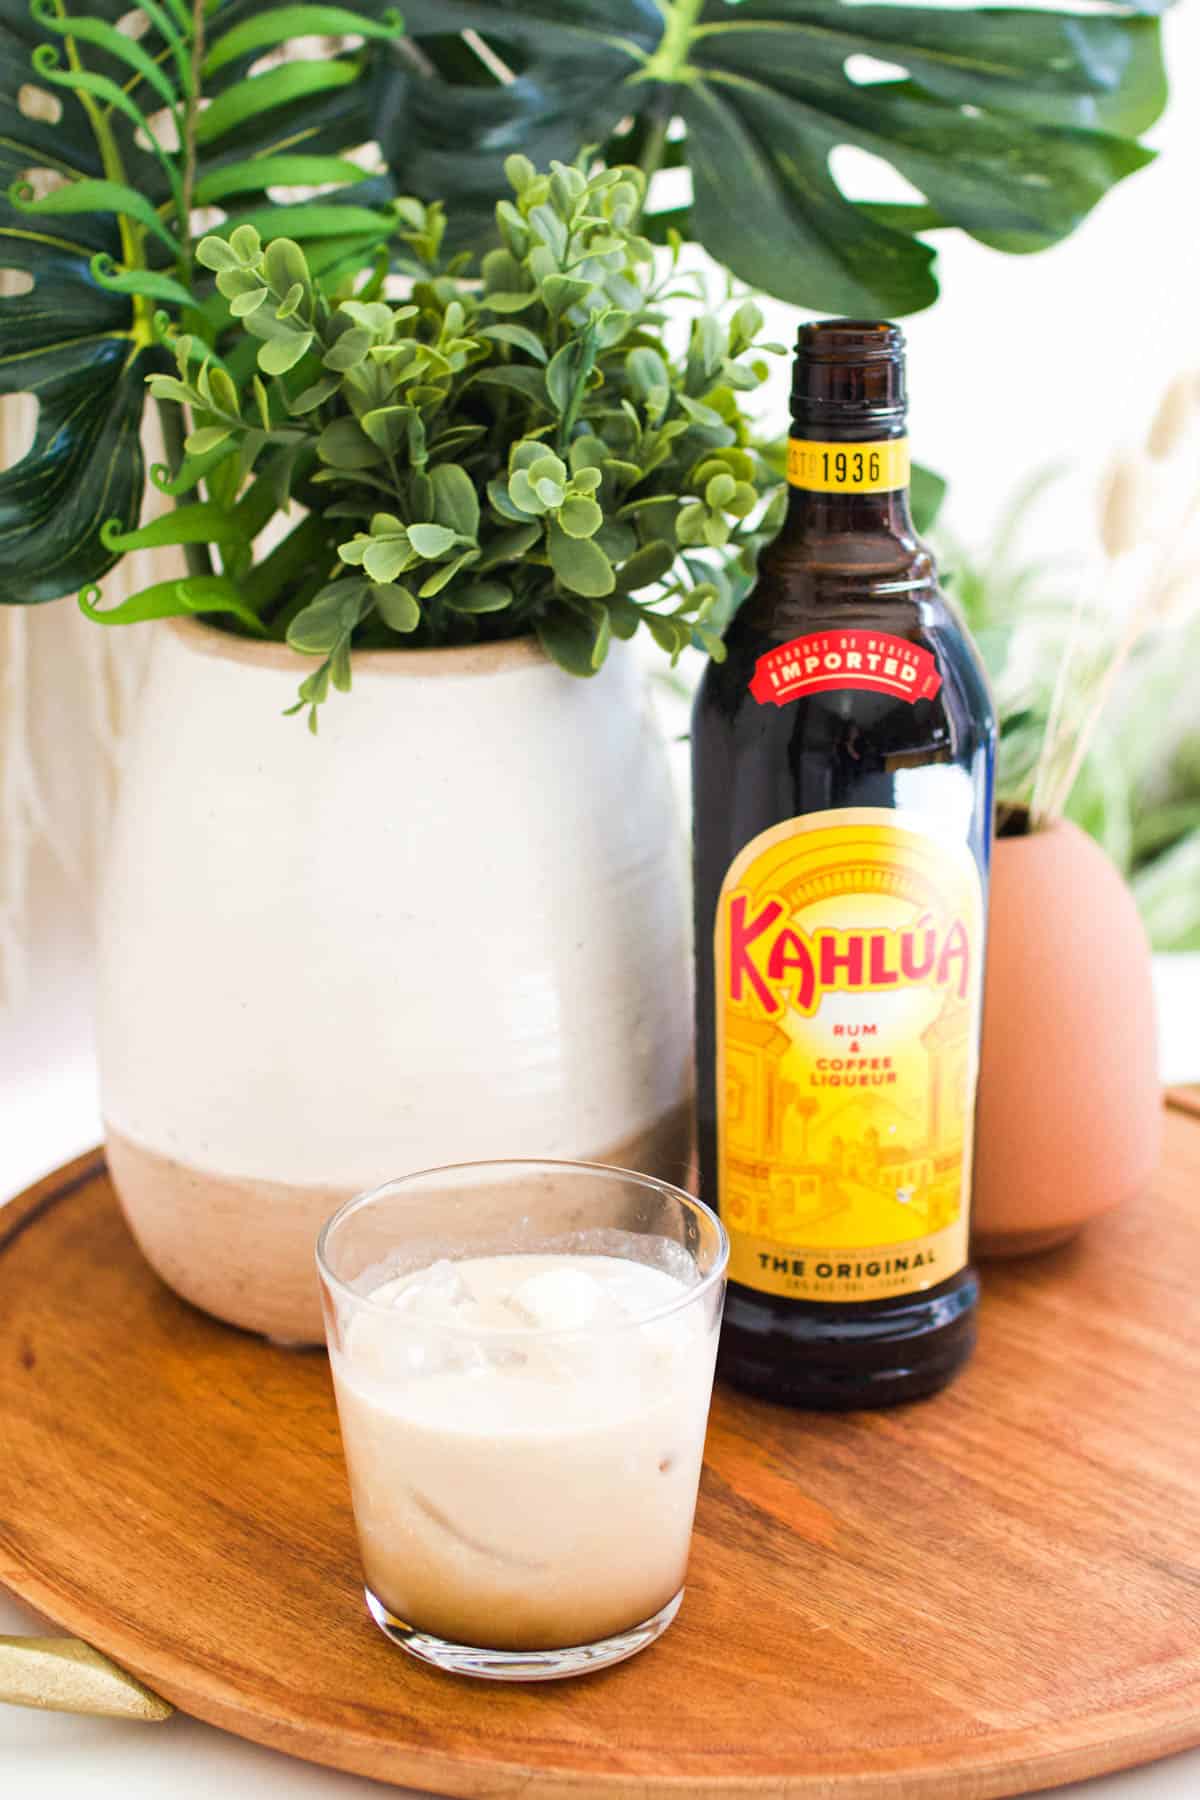 A classic Kahlua White Russian cocktail on a tray with a bottle of Kahlua.